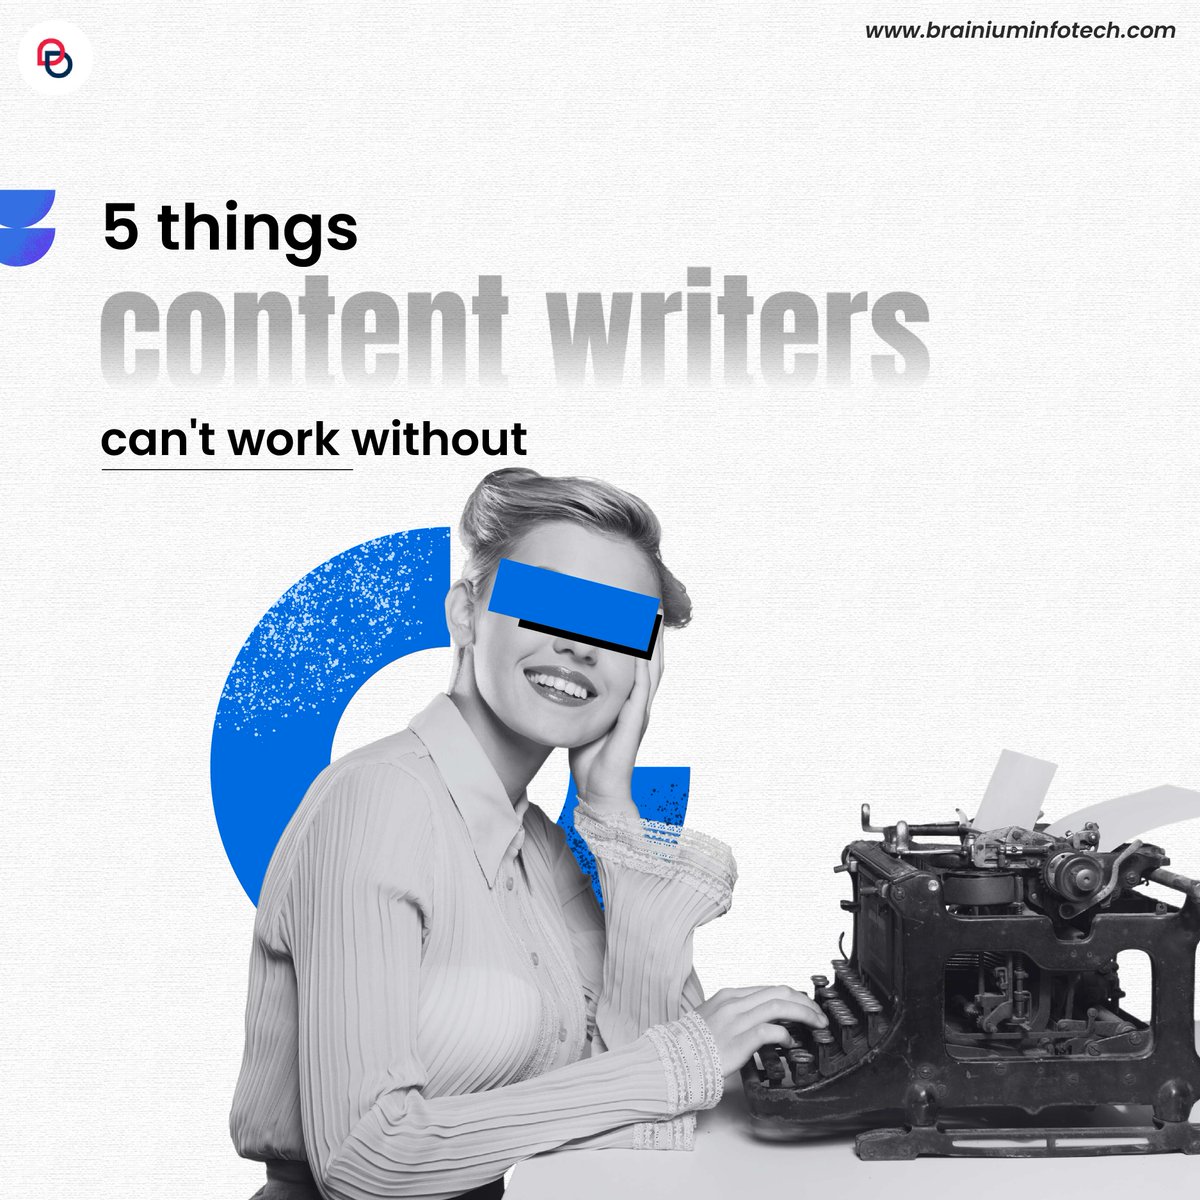 Write now, panic later 😅

It's the content writer's way! 

#contentwriter #humor #funatwork #ideateimplementsucceed